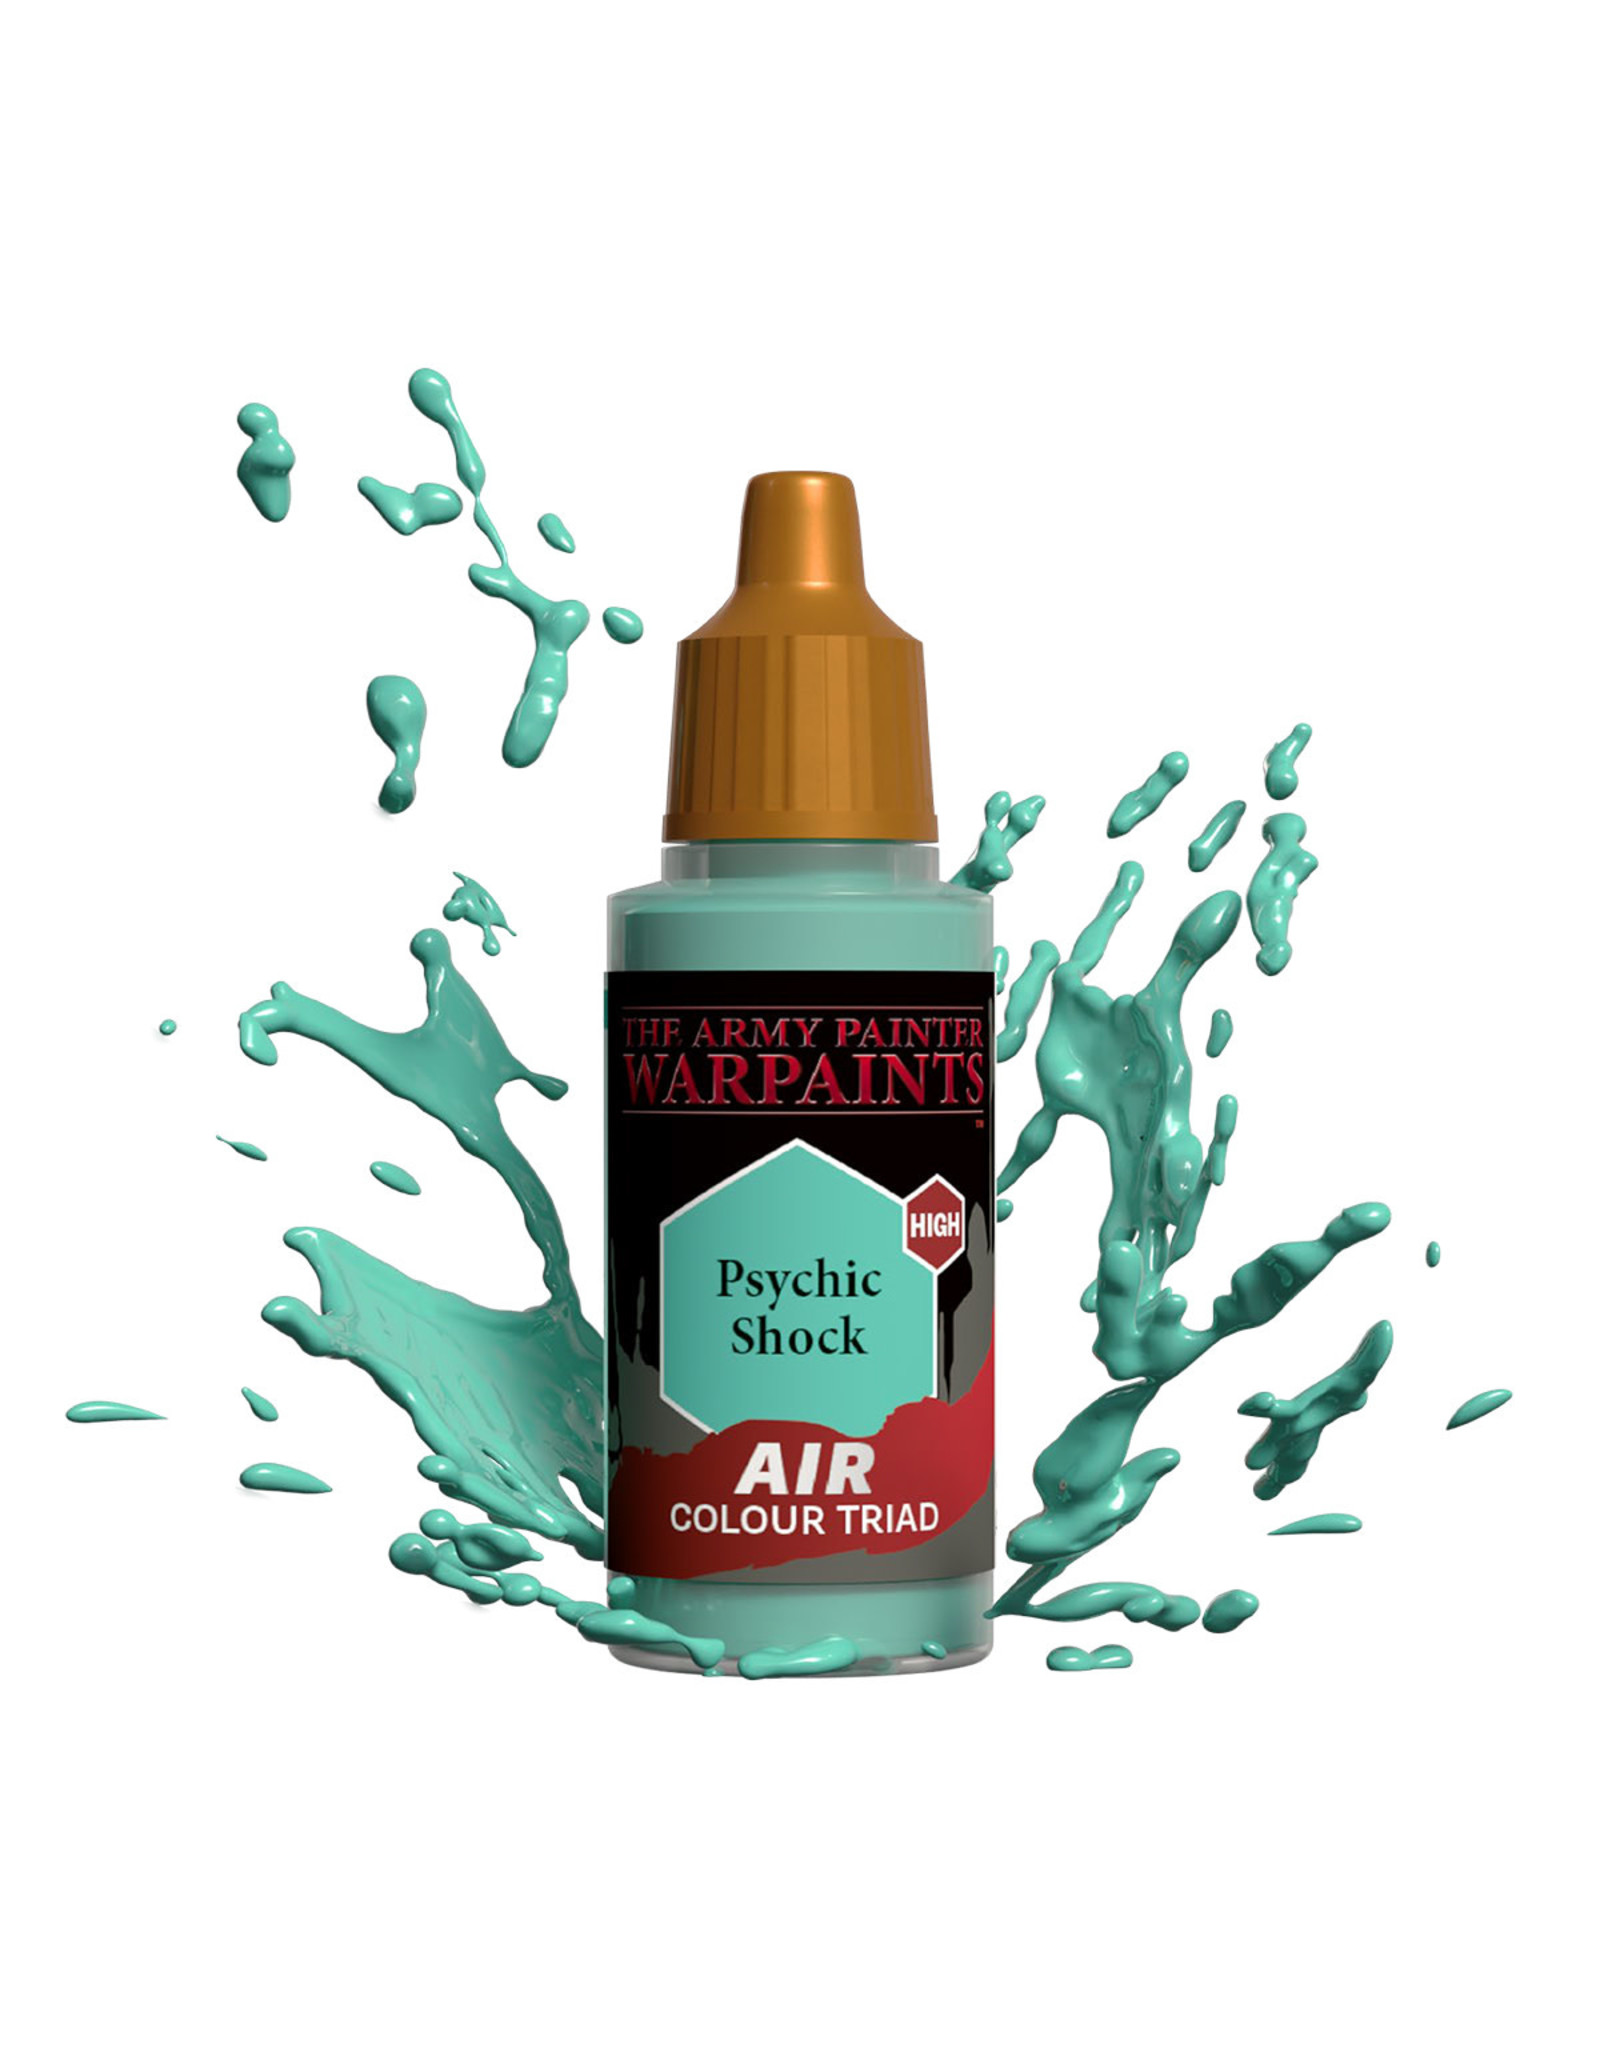 The Army Painter The Army Painter Warpaints Air: Psychic Shock